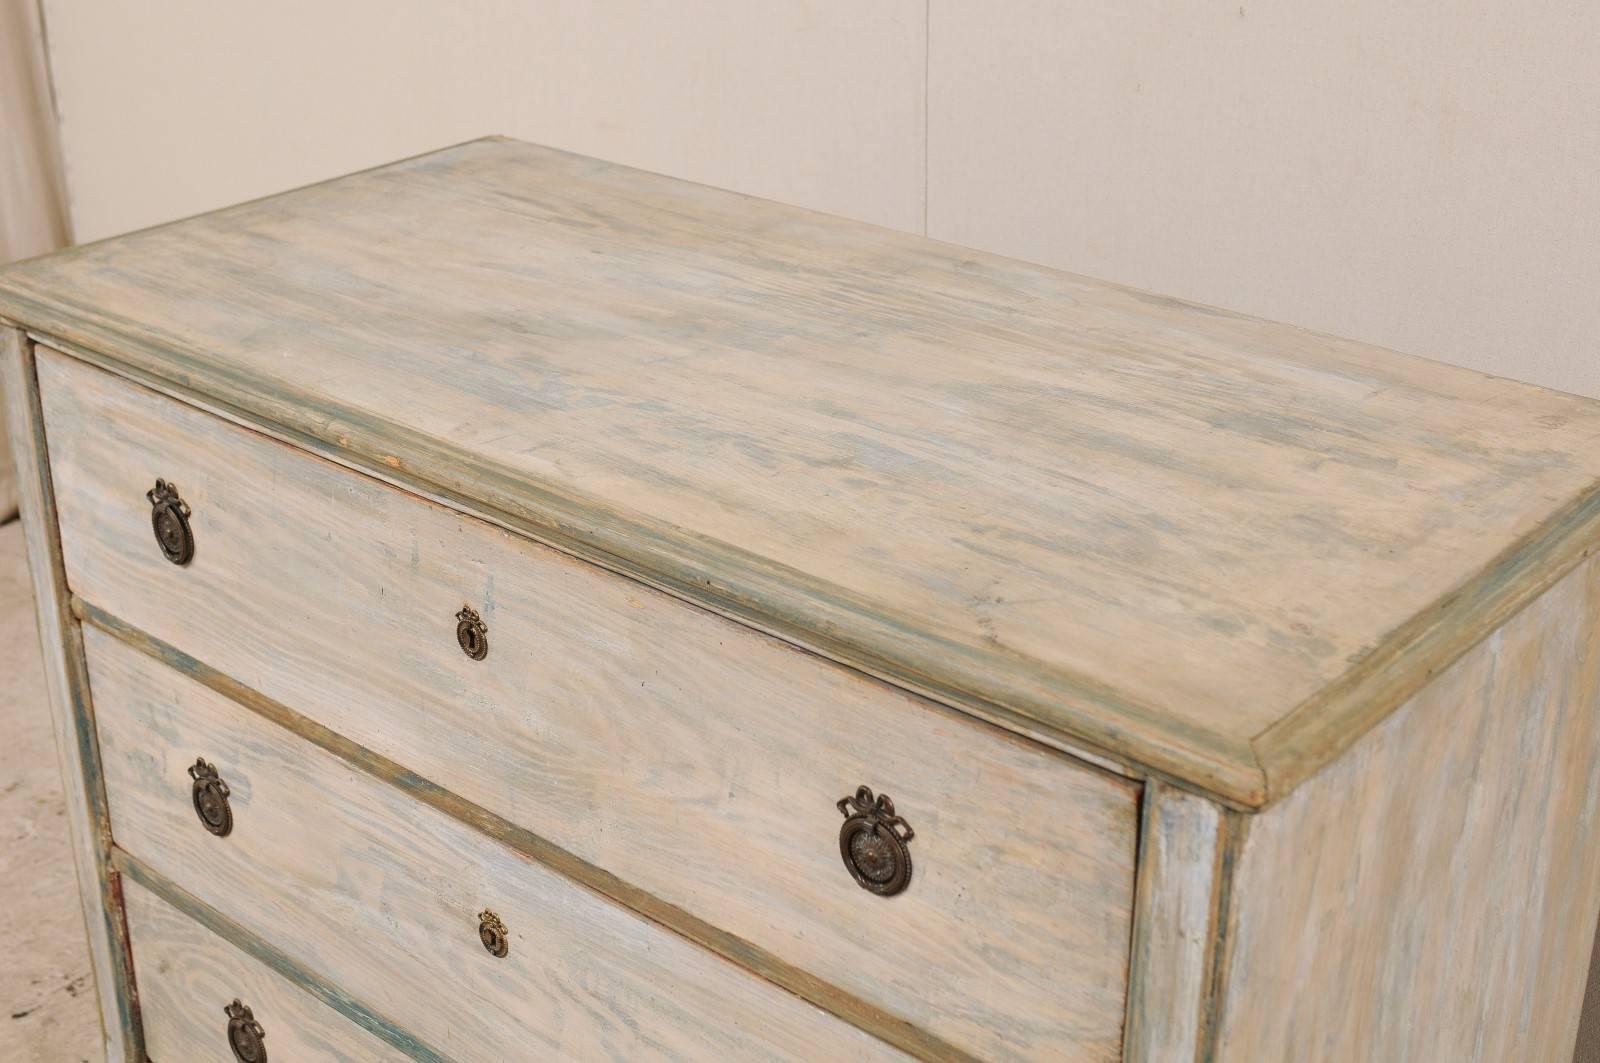 19th Century Swedish Karl Johan Three-Drawer Painted Wood Chest in Cream and Soft Teal